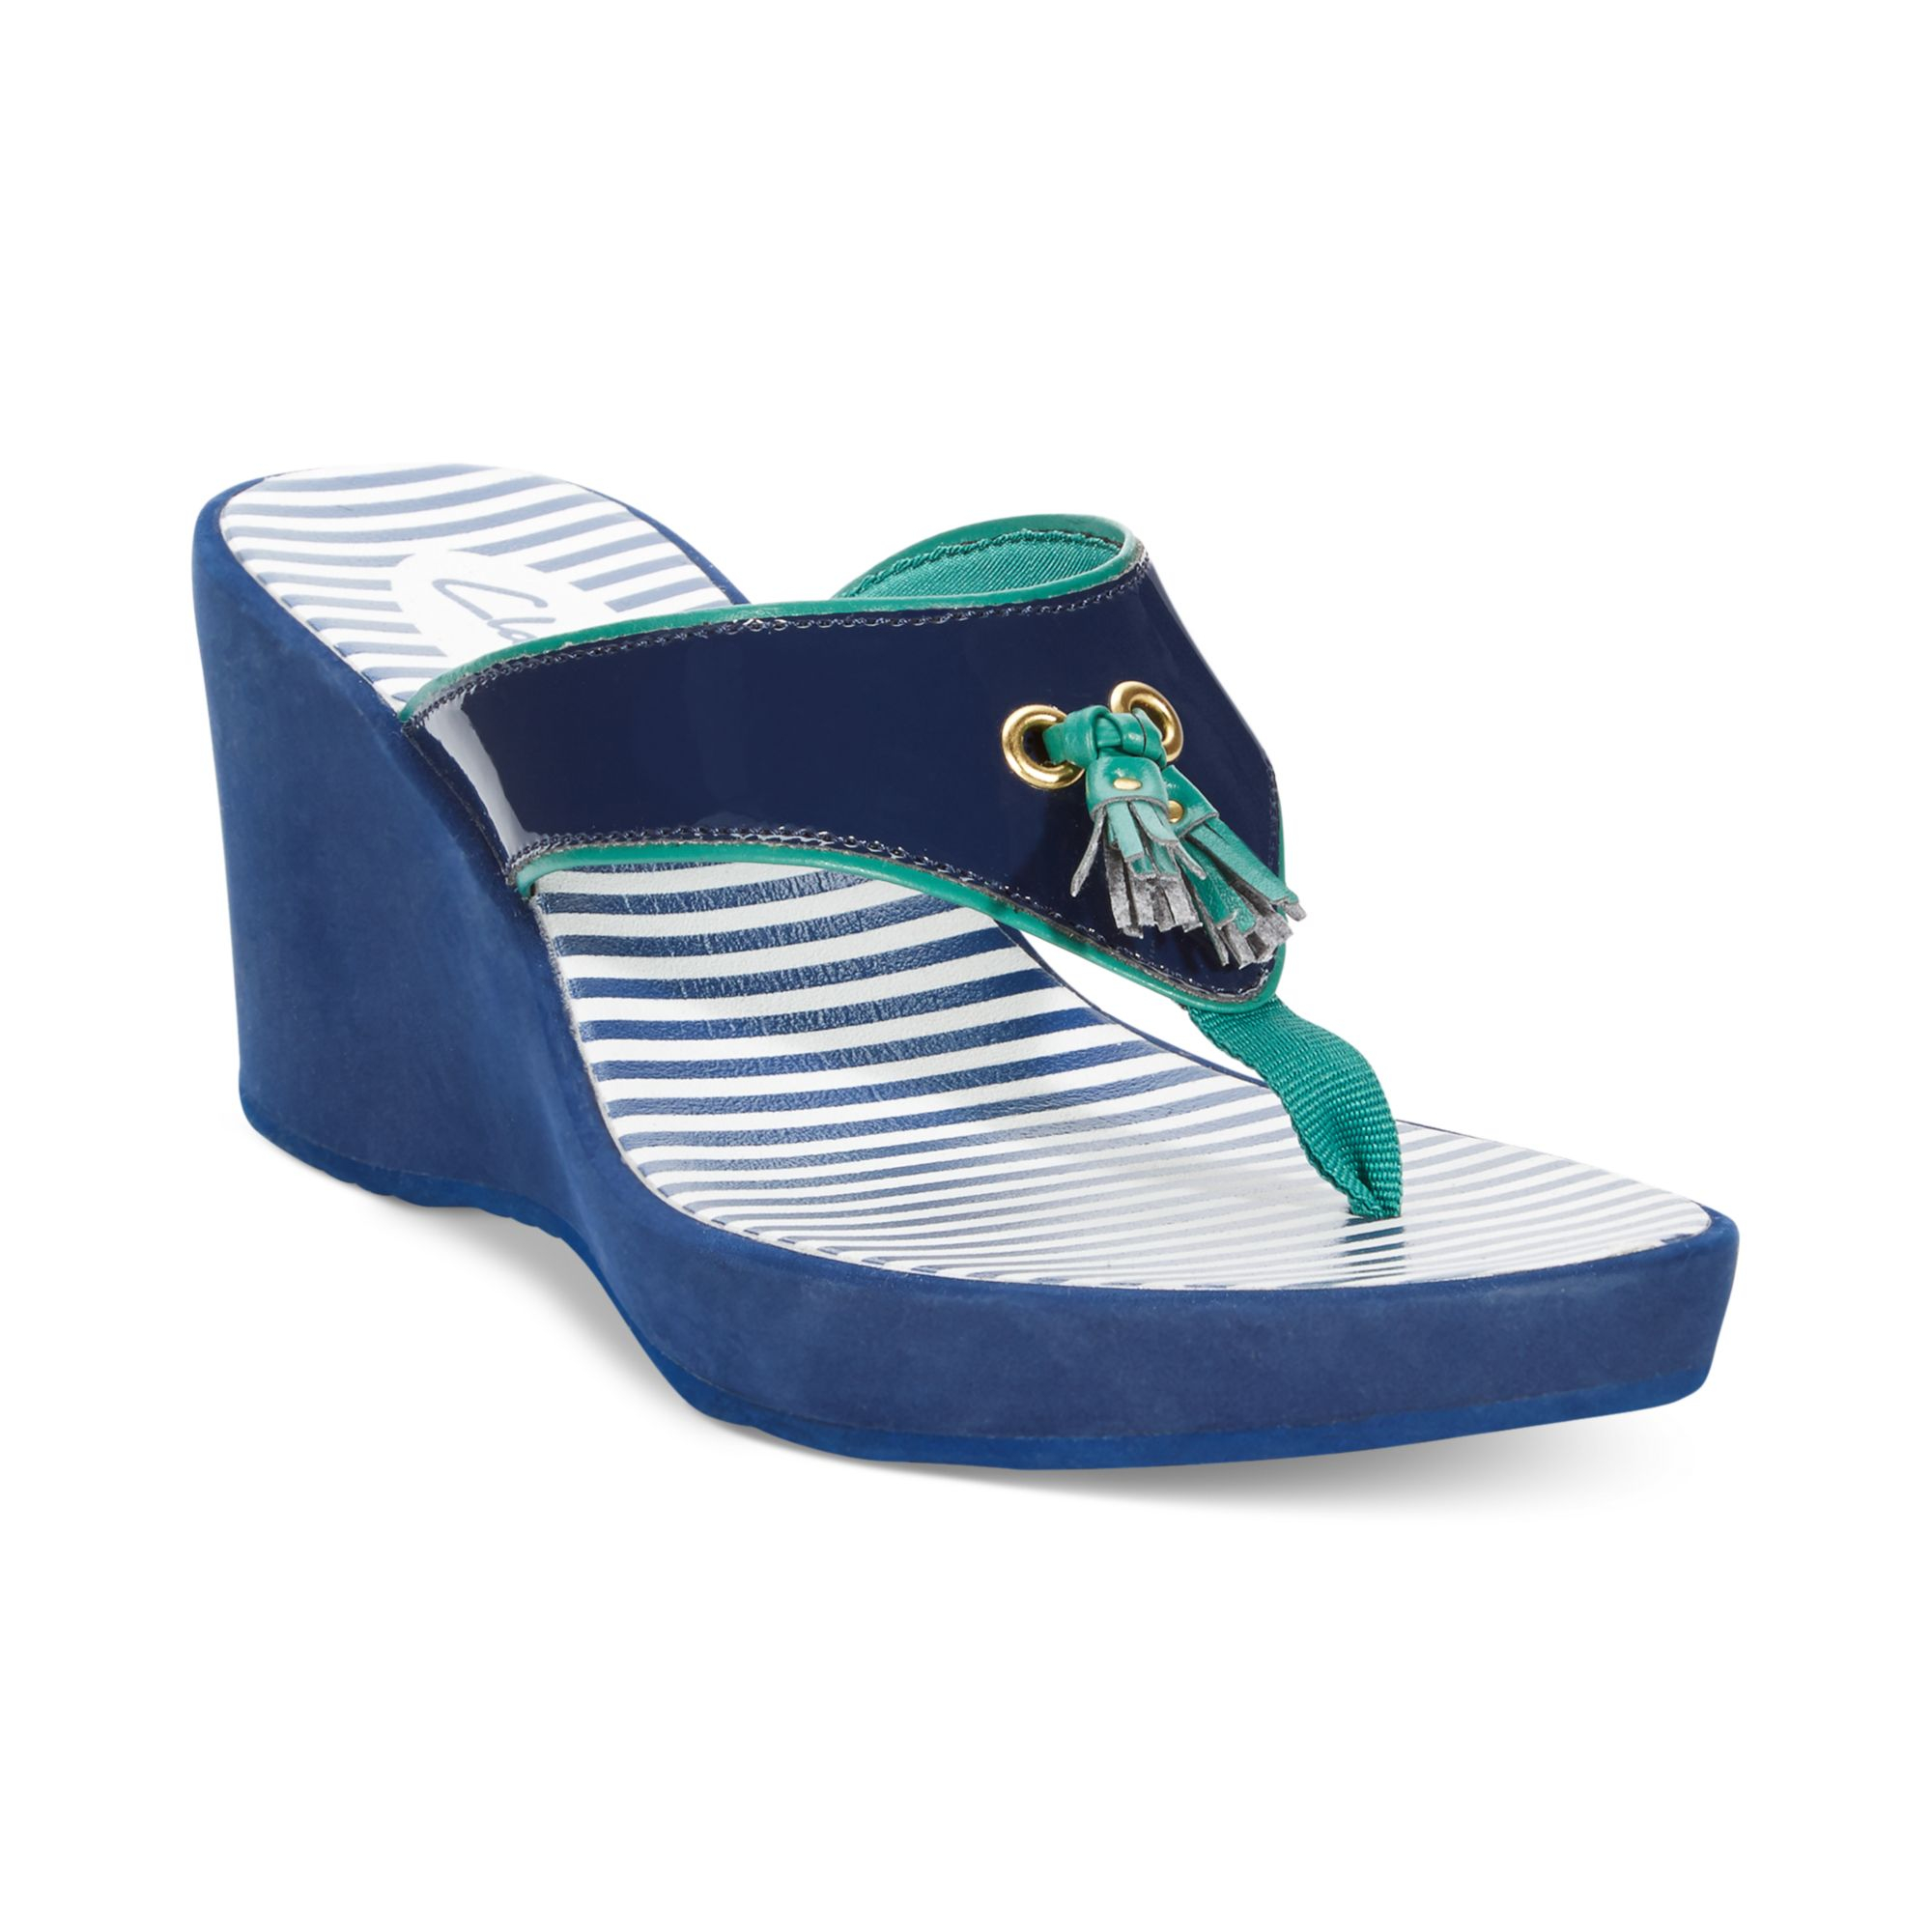 Clarks Collection Women'S Yacht Flash Wedge Sandals in Blue | Lyst